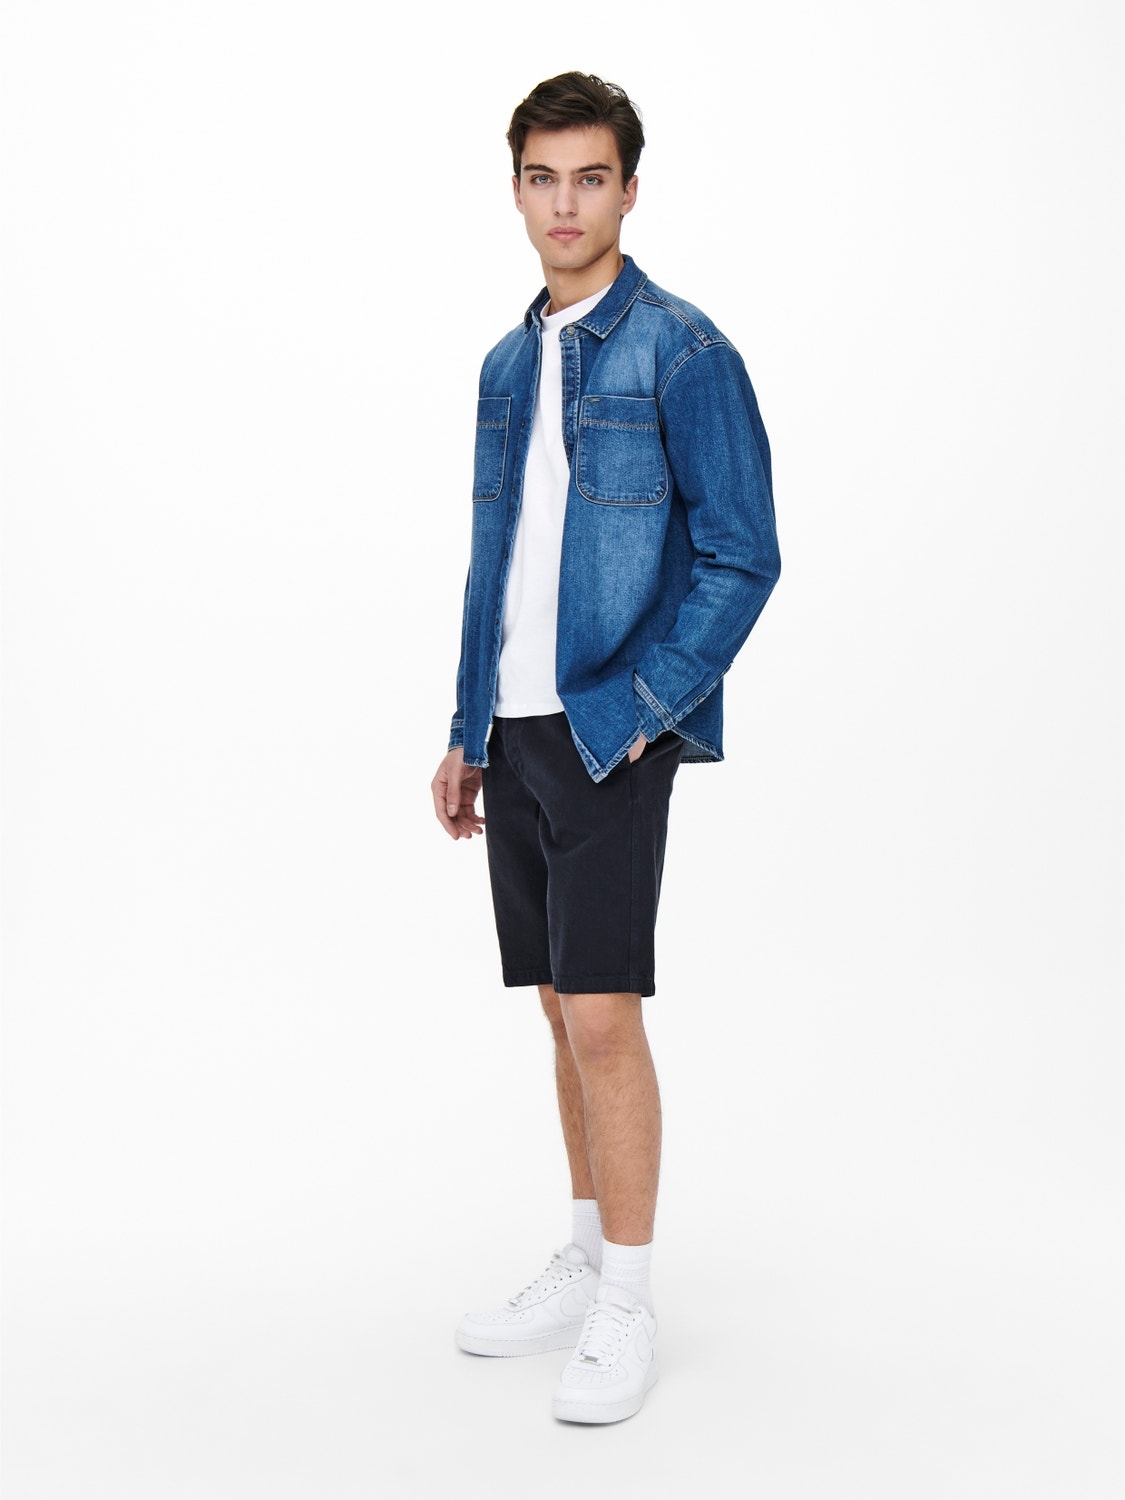 ONLY & SONS Tapered Fit Mid waist Shorts -Night Sky - 22021818